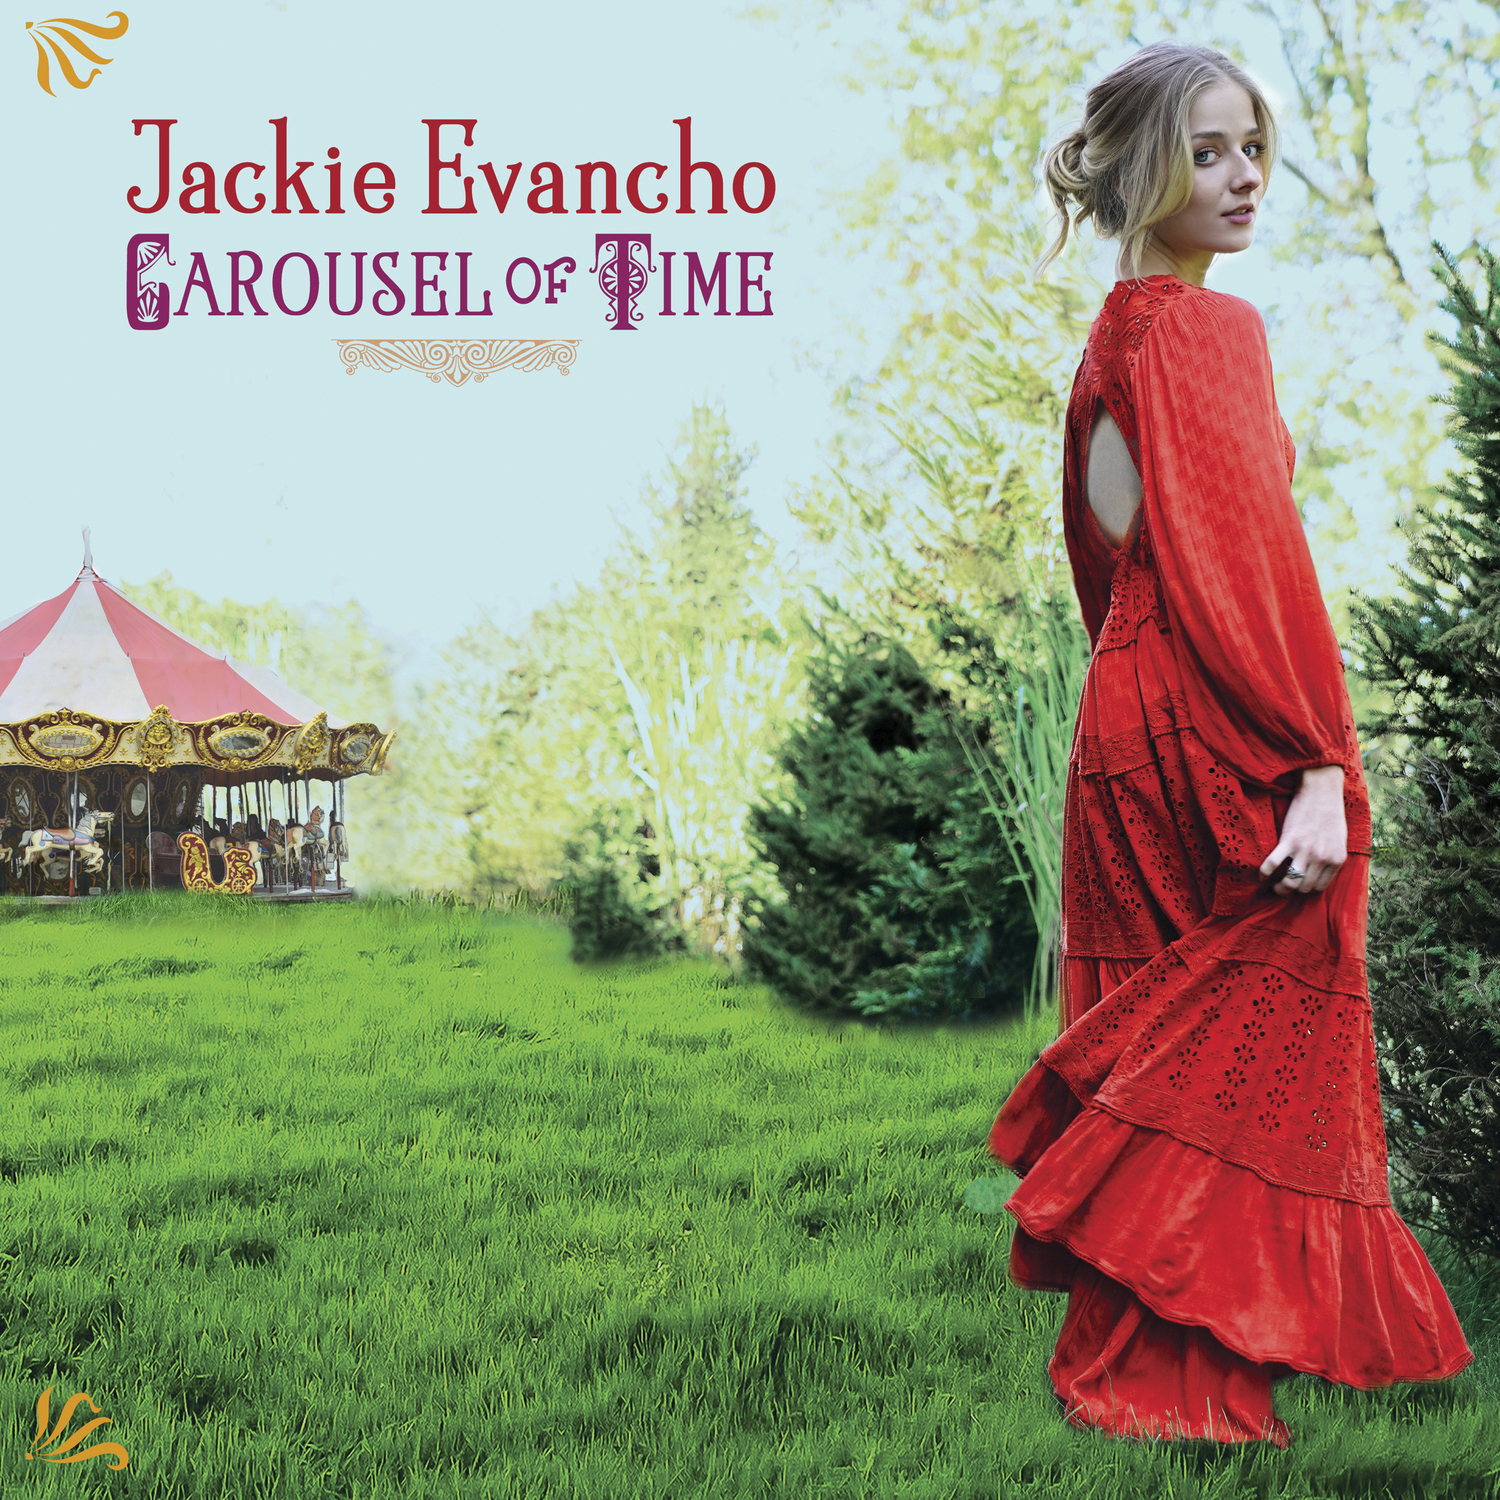 Jackie Evancho - 2022 - Carousel of Time (24-96)